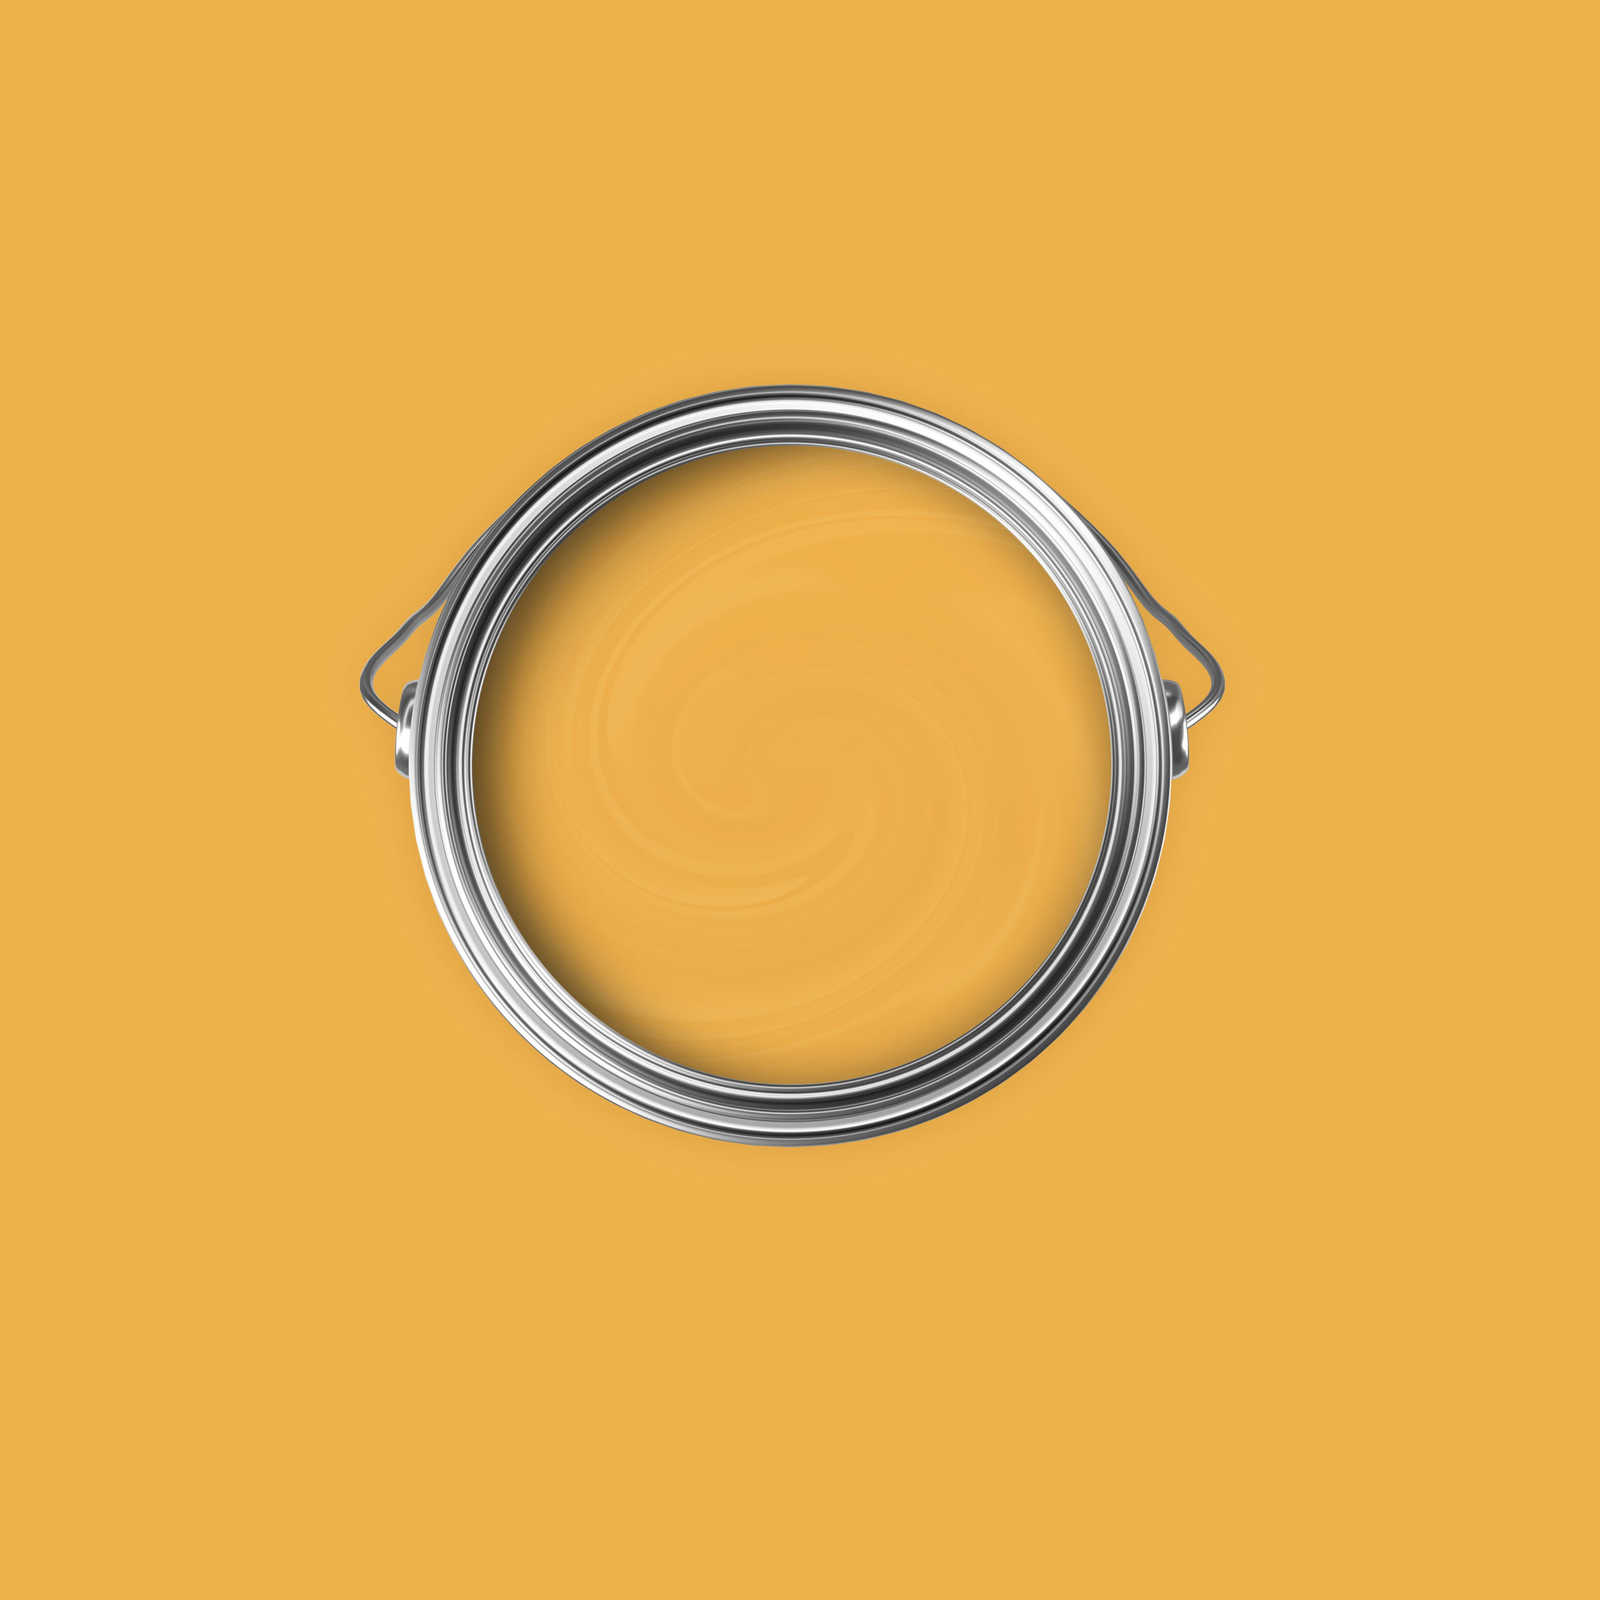             Premium Wall Paint strong saffron yellow »Juicy Yellow« NW806 – 2,5 litre
        